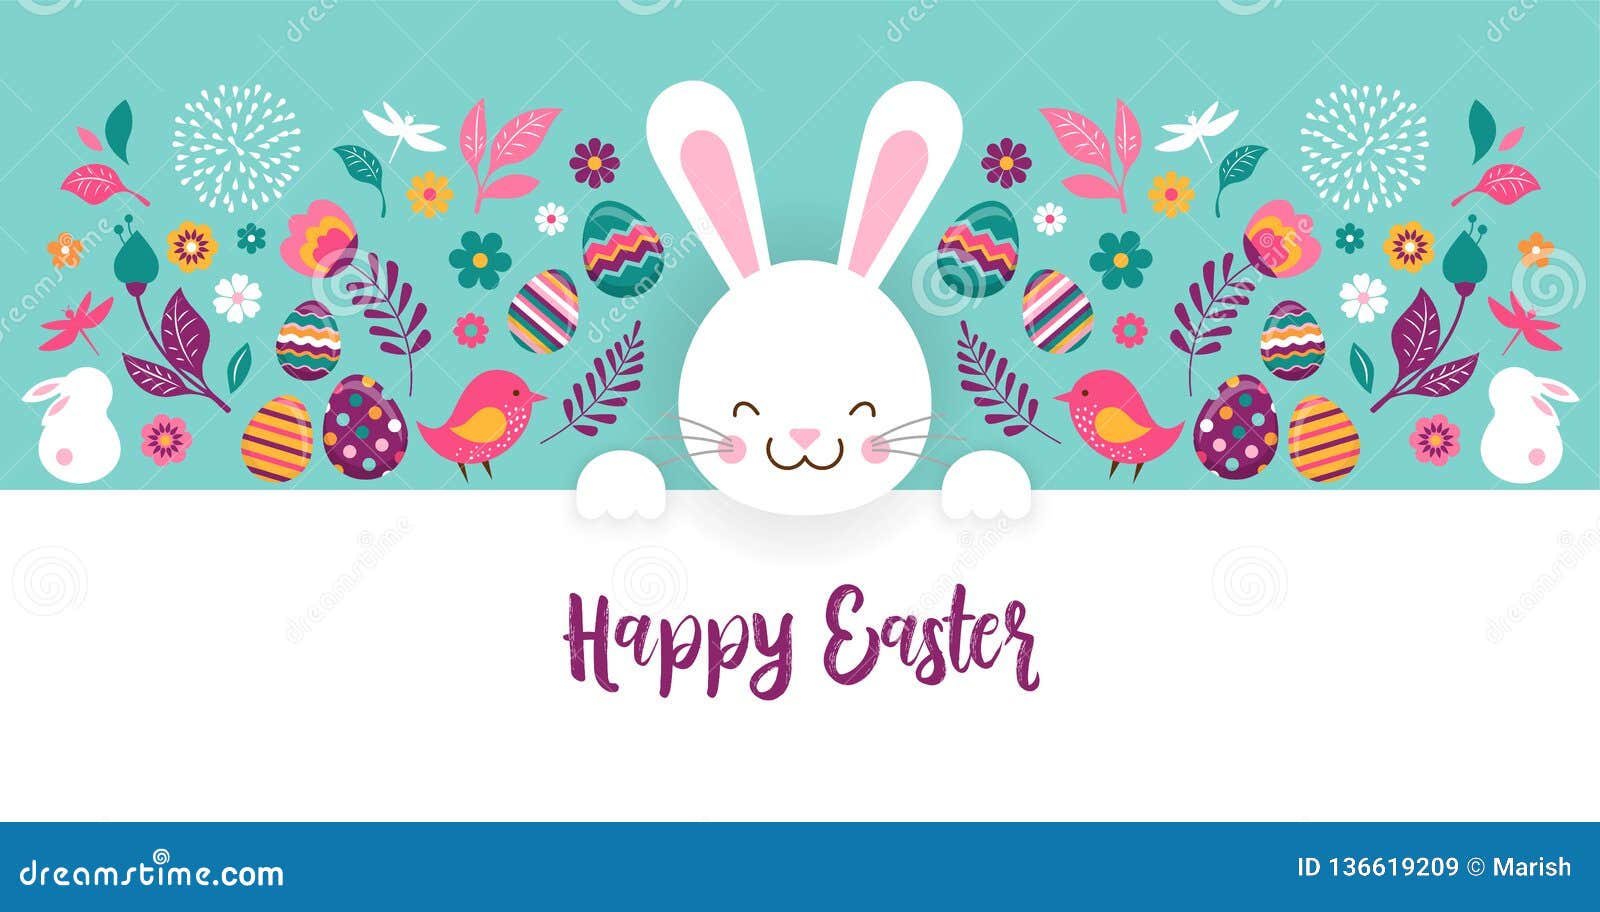 happy easter,  banner with flowers, eggs and bunnies